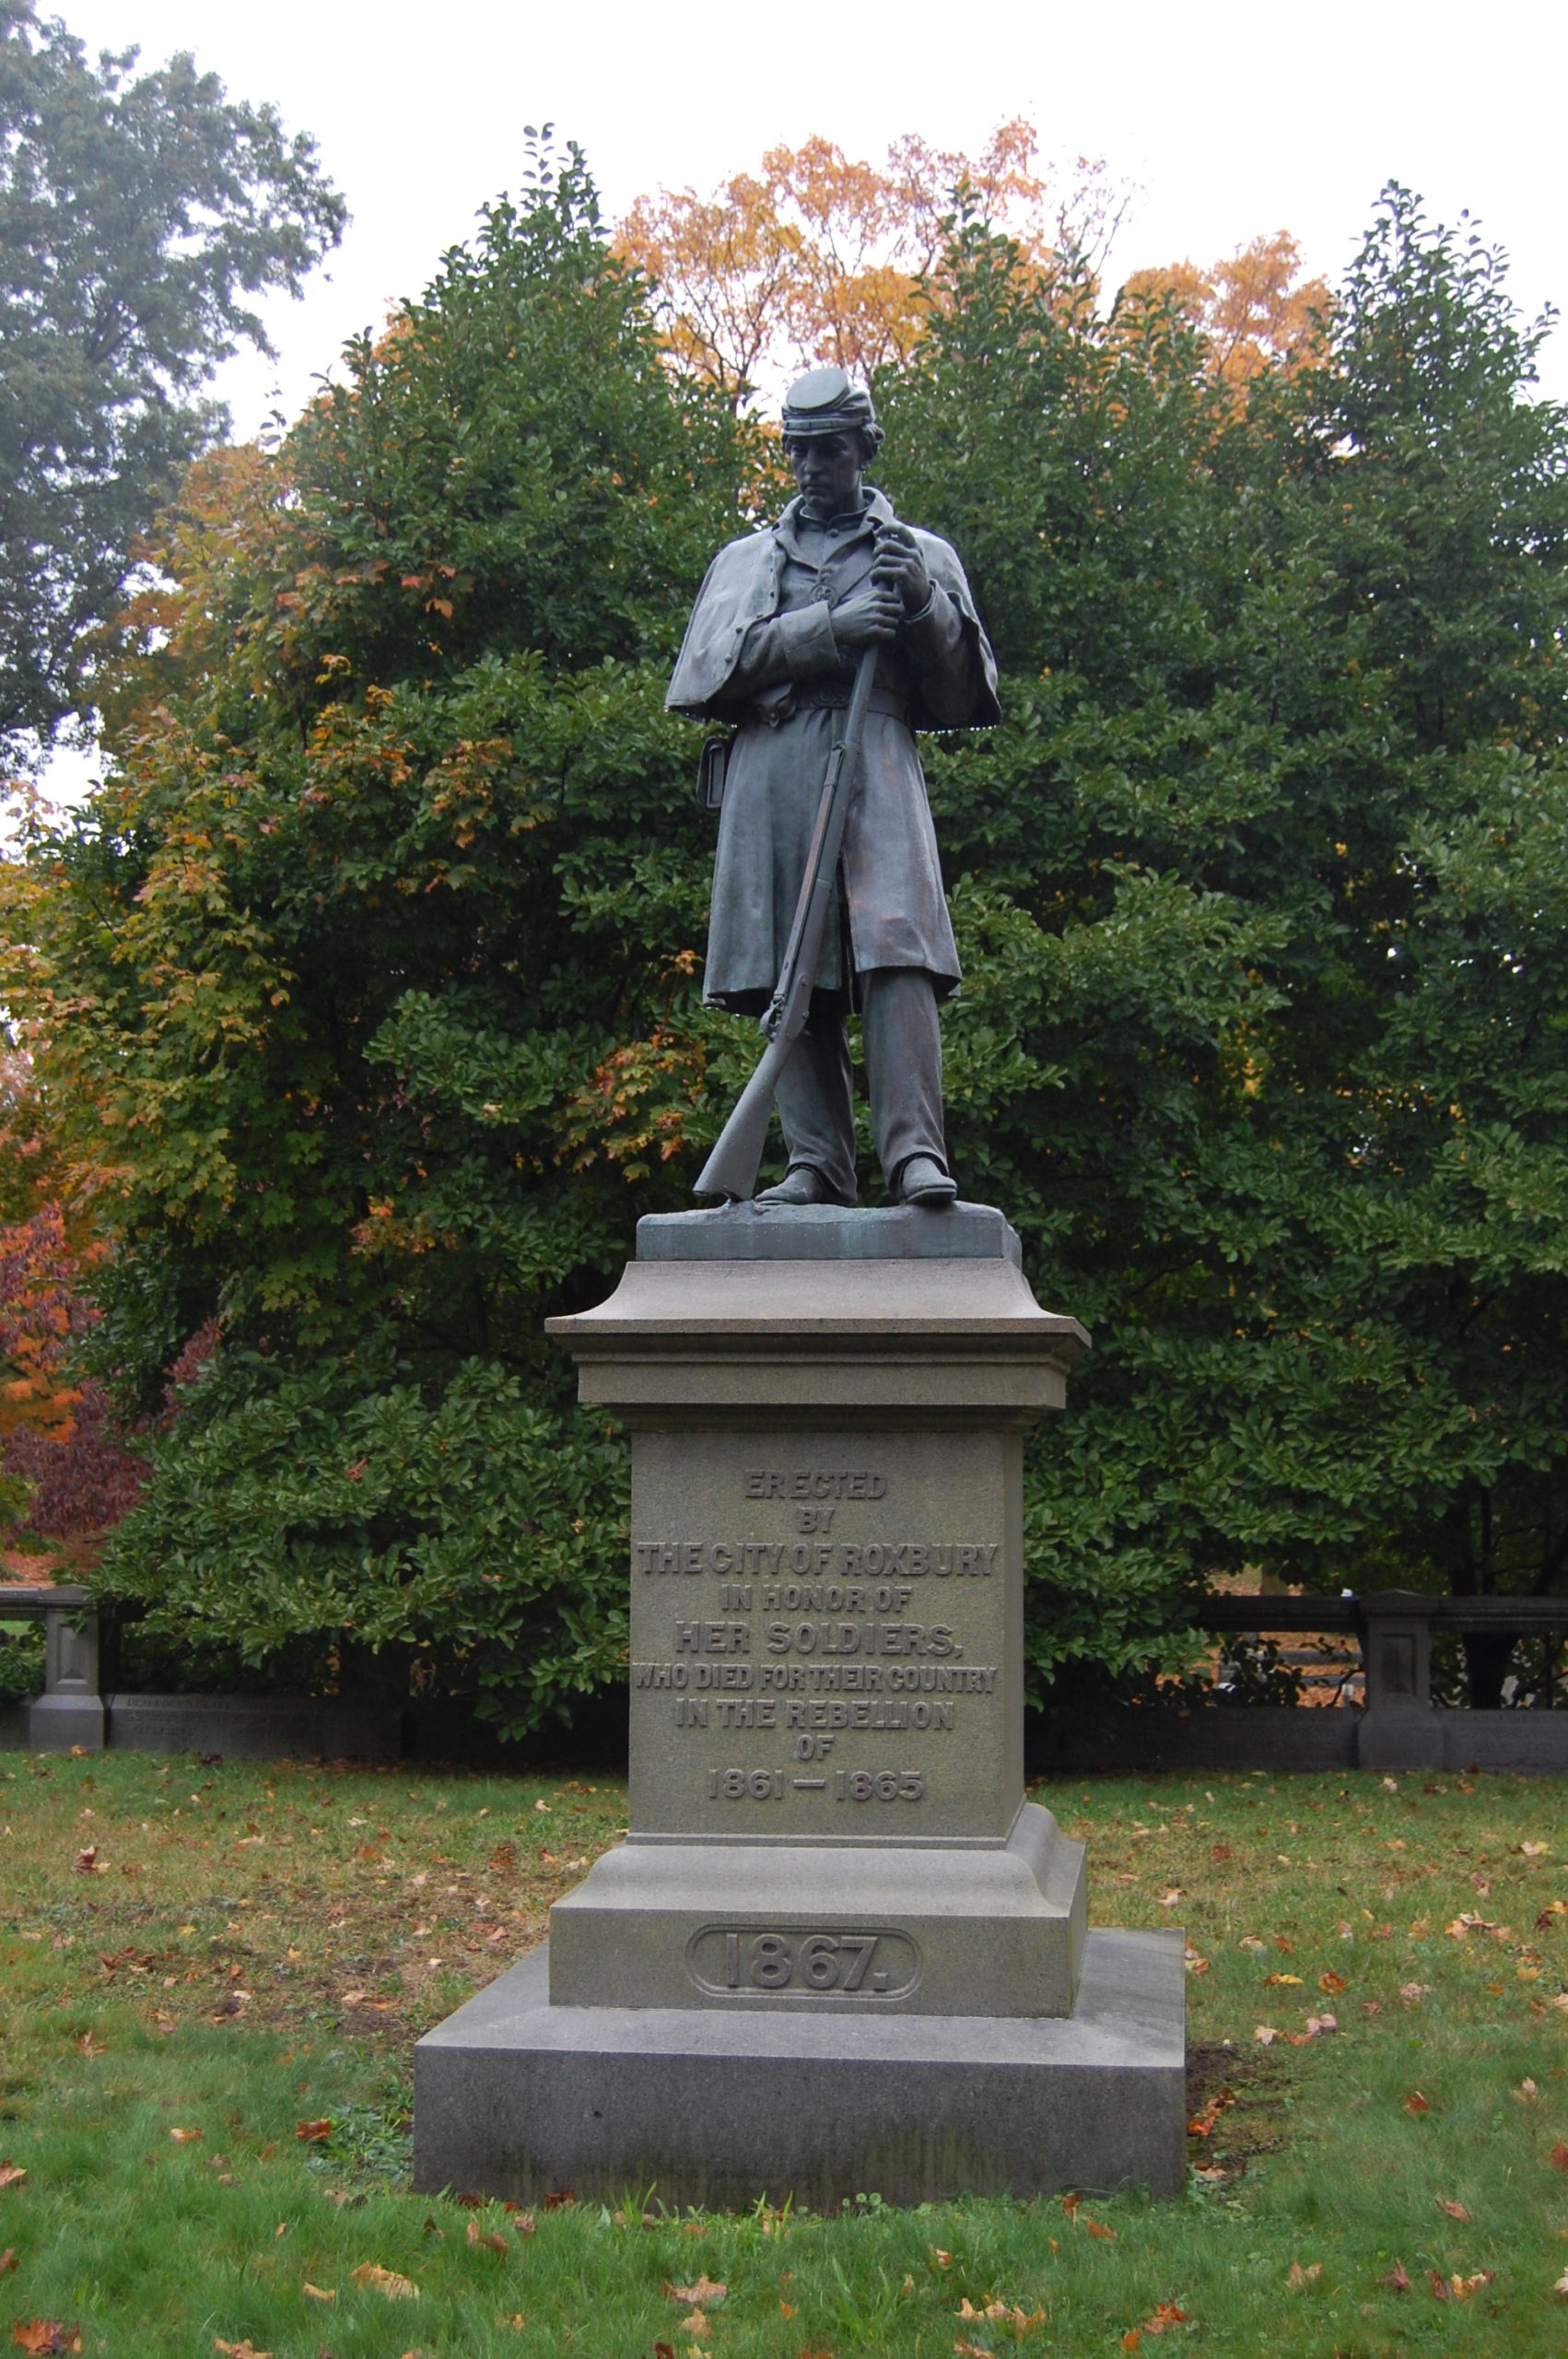 Martin Milmore (sculptor) and Ames Manufacturing Company (founder), <em>Roxbury Soldier Monument</em>, Forest Hills Cemetery, Boston, 1867 (photo: Sarah Beetham, CC BY-NC-ND 2.0)